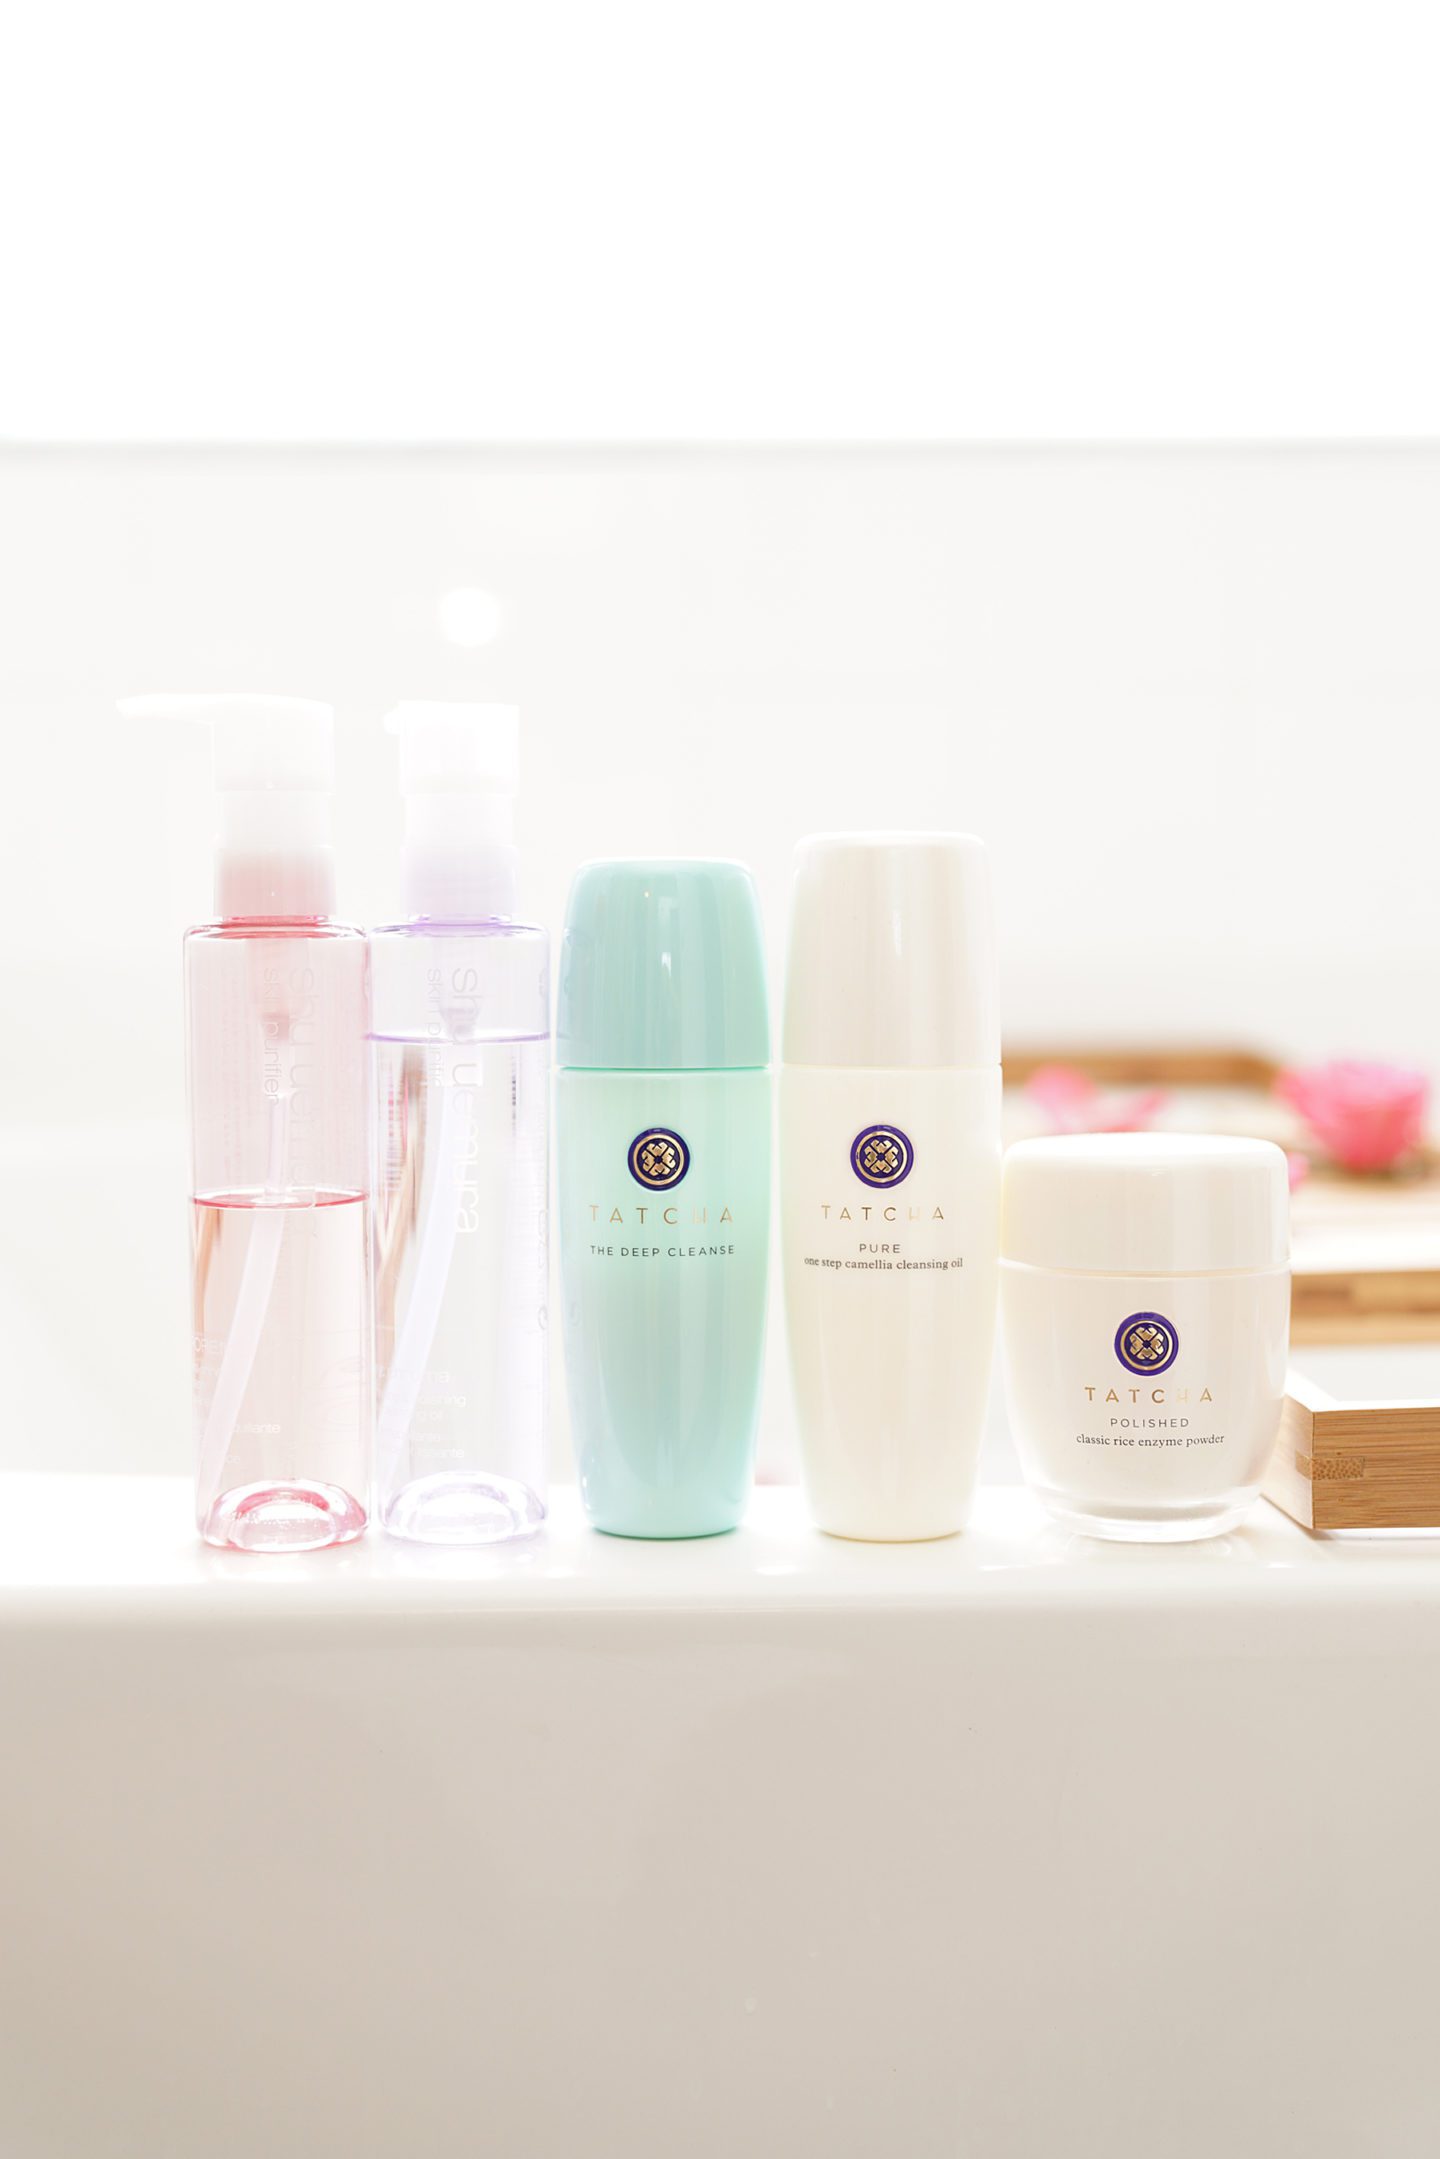 Cleansing Oil Shu Uemura, and Face Cleansers from Tatcha